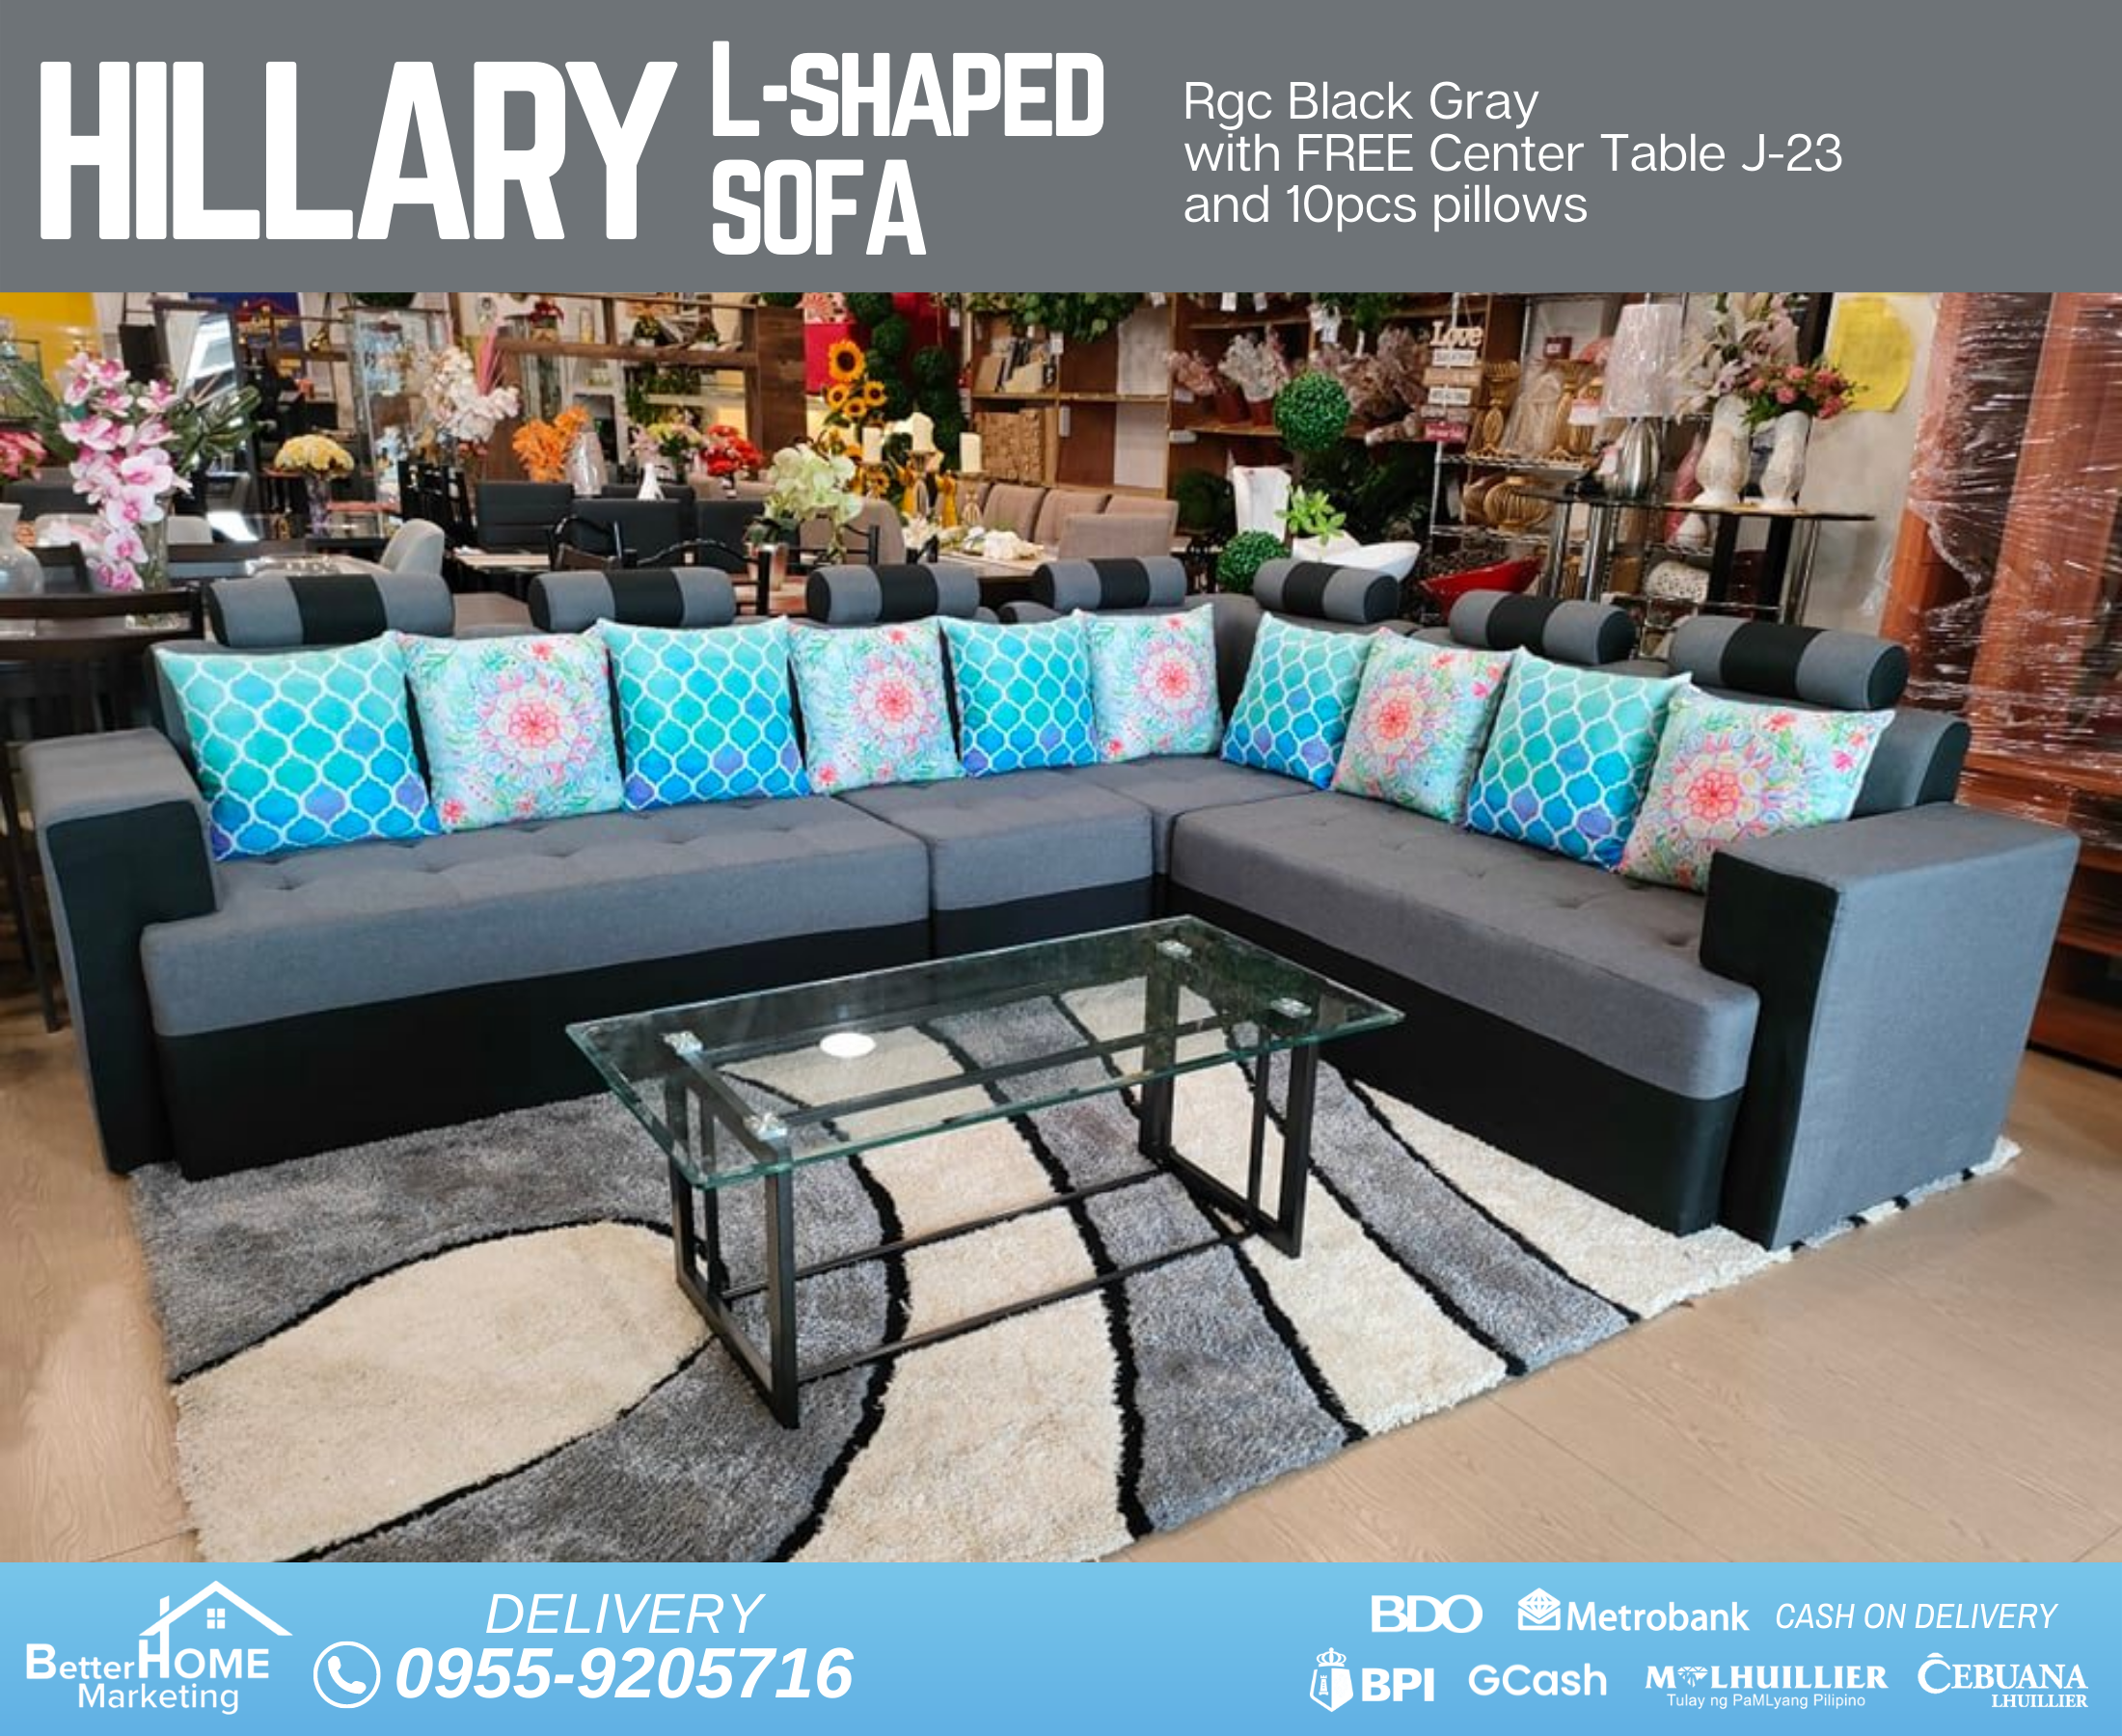 Hillary L-Shaped Sofa RGC Black Gray with FREE Center Table J-23 and 10pcs pillows